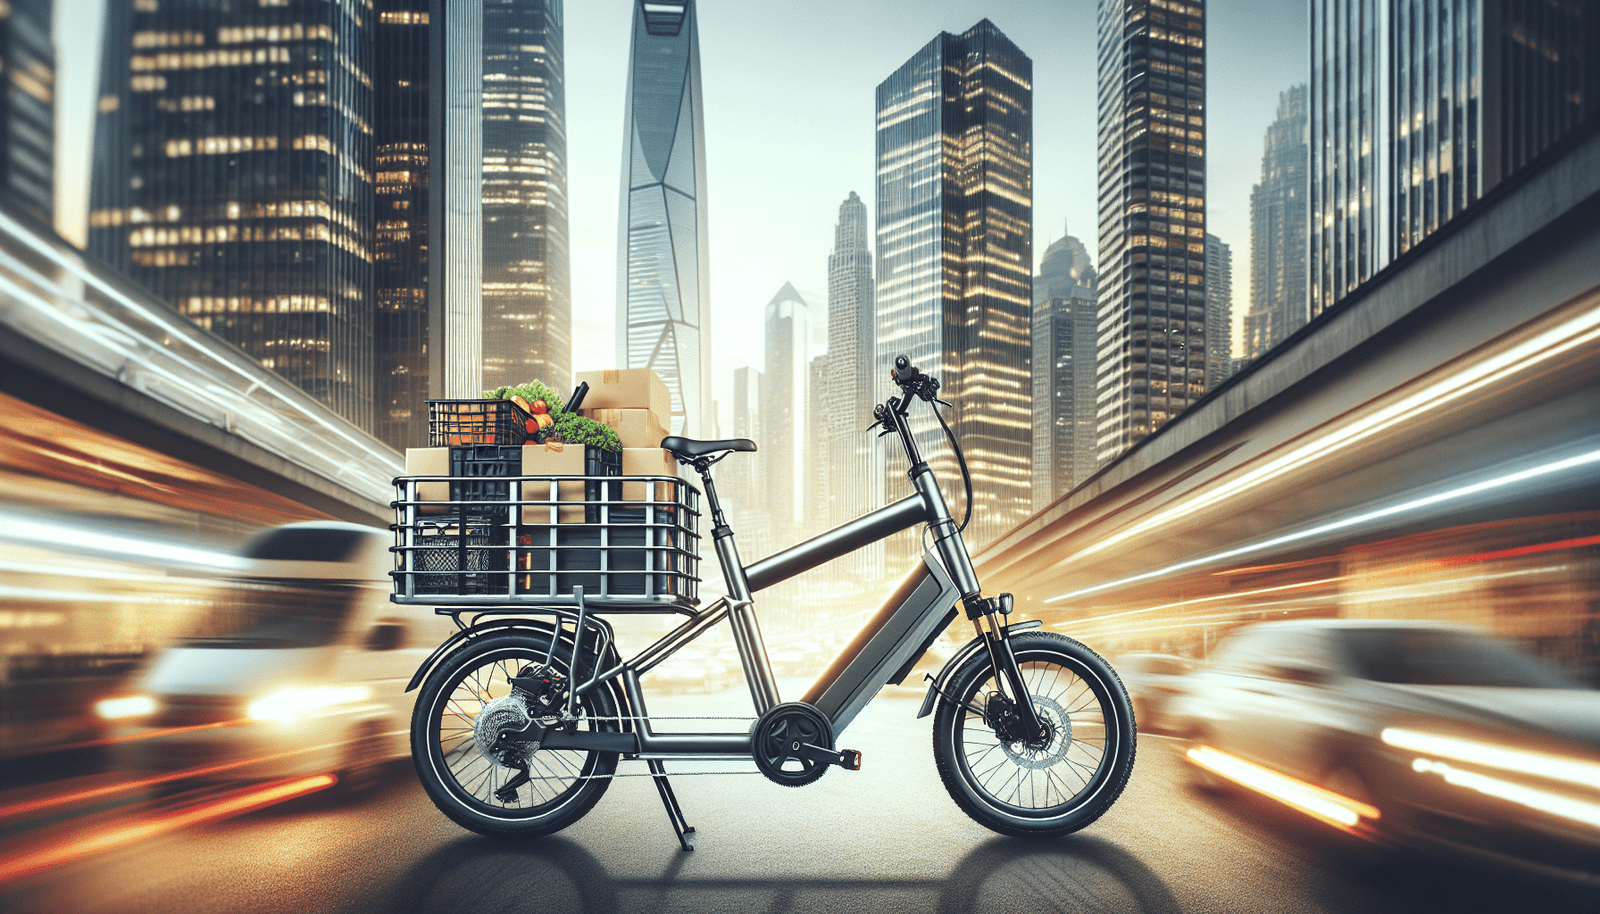 Are There Any Limitations On The Weight A Cargo-carrying Electric Bike Can Handle?